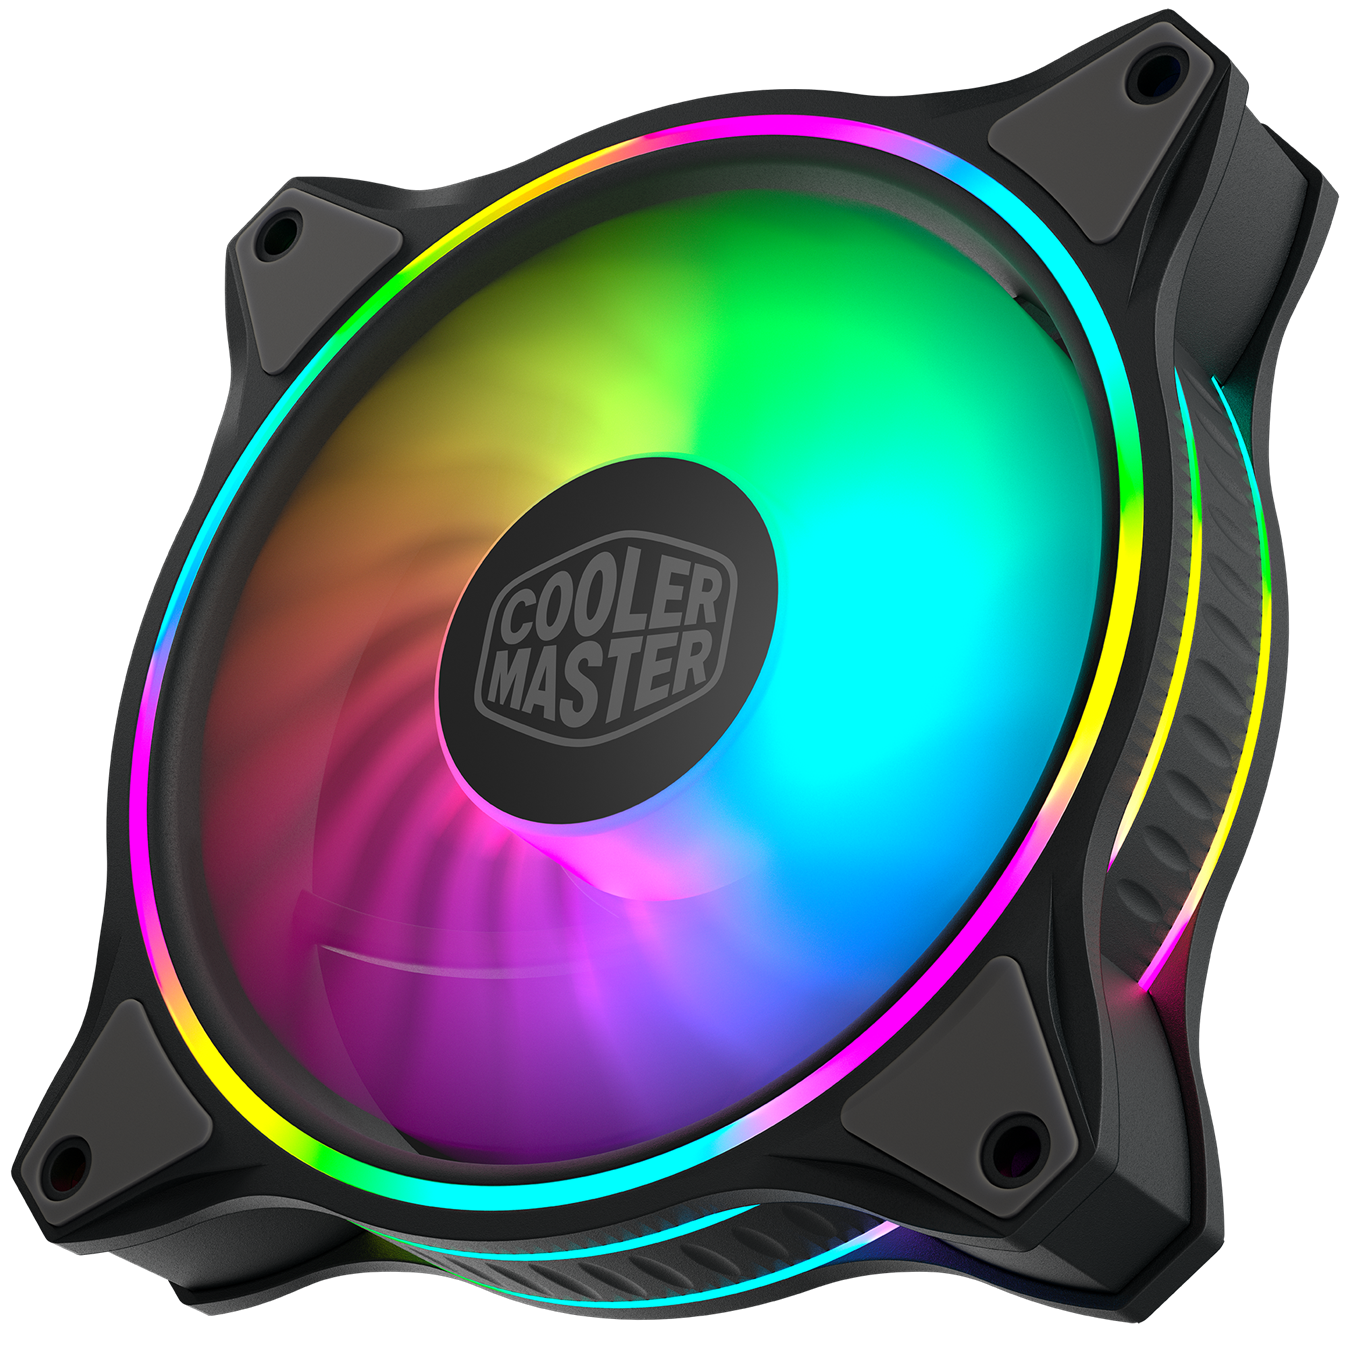 4-Pin 12 V PWM Static Pressure for Computer Case & Flüssigkeit MF120 Halo Absorbing Rubber Pads Cooler Master MasterFan MF120 Halo Duo-Ring Addressable RGB Lighting 120 mm Fan 